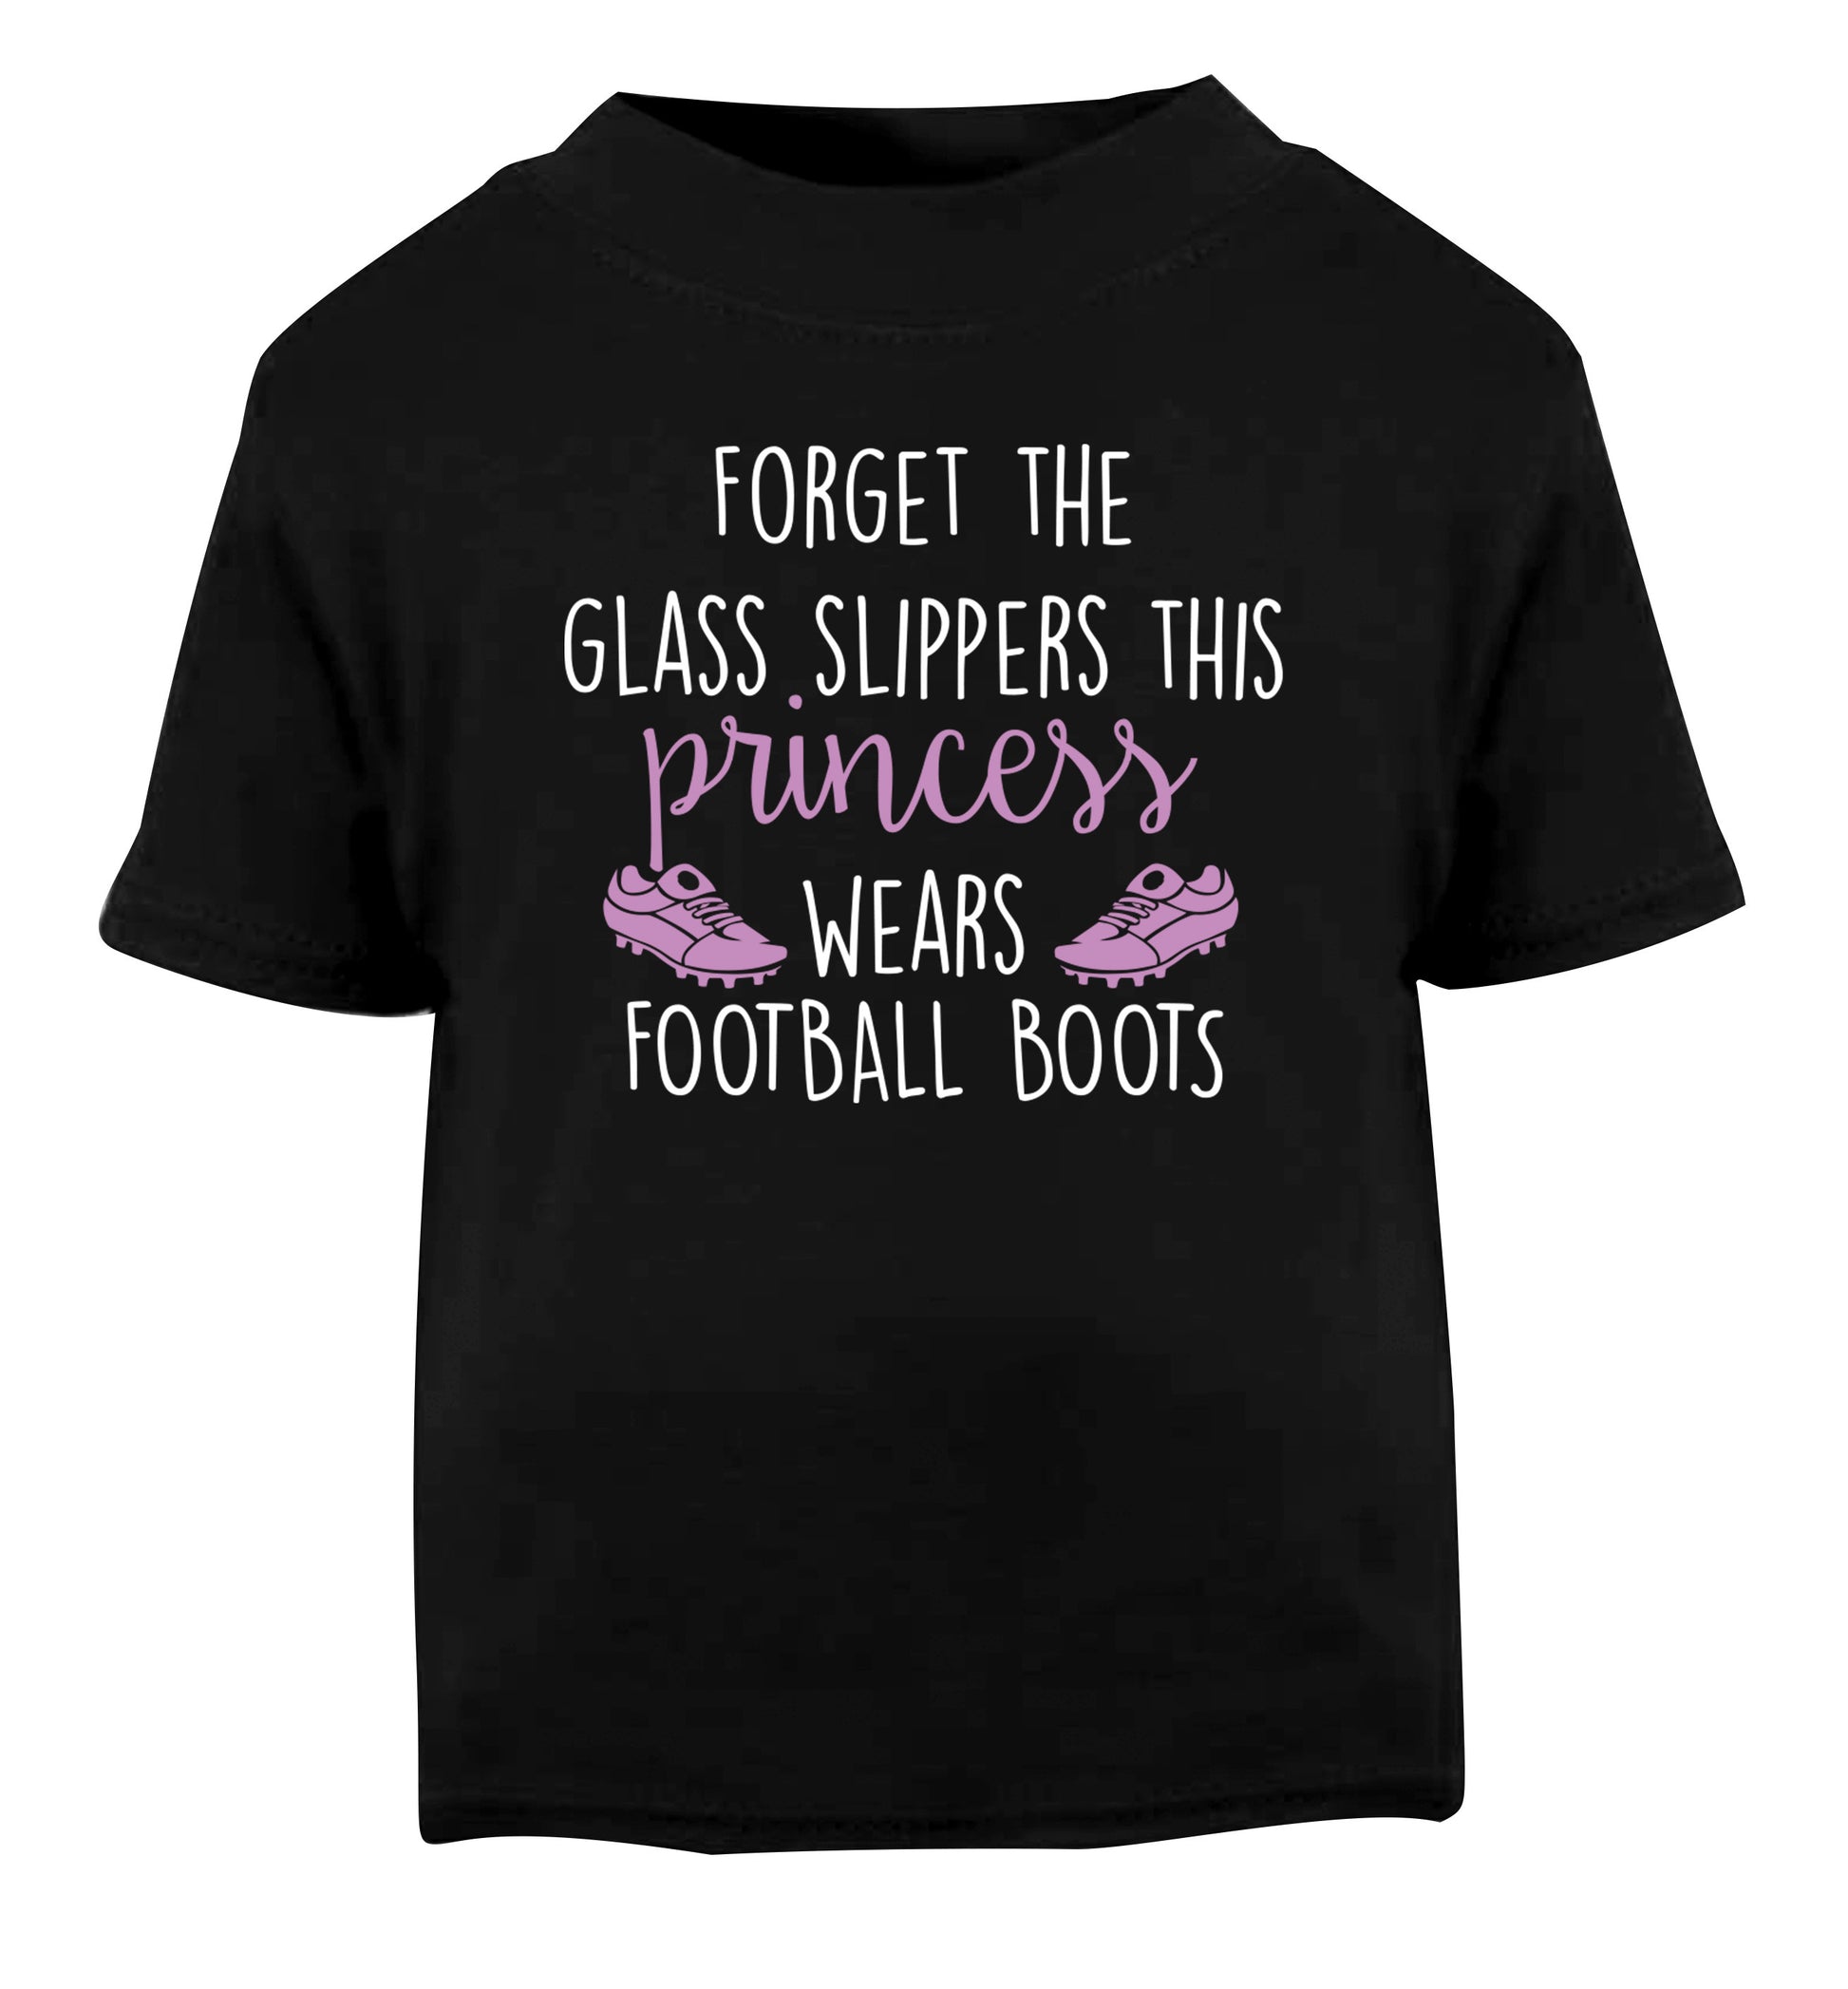 Forget the glass slippers this princess wears football boots Black Baby Toddler Tshirt 2 years